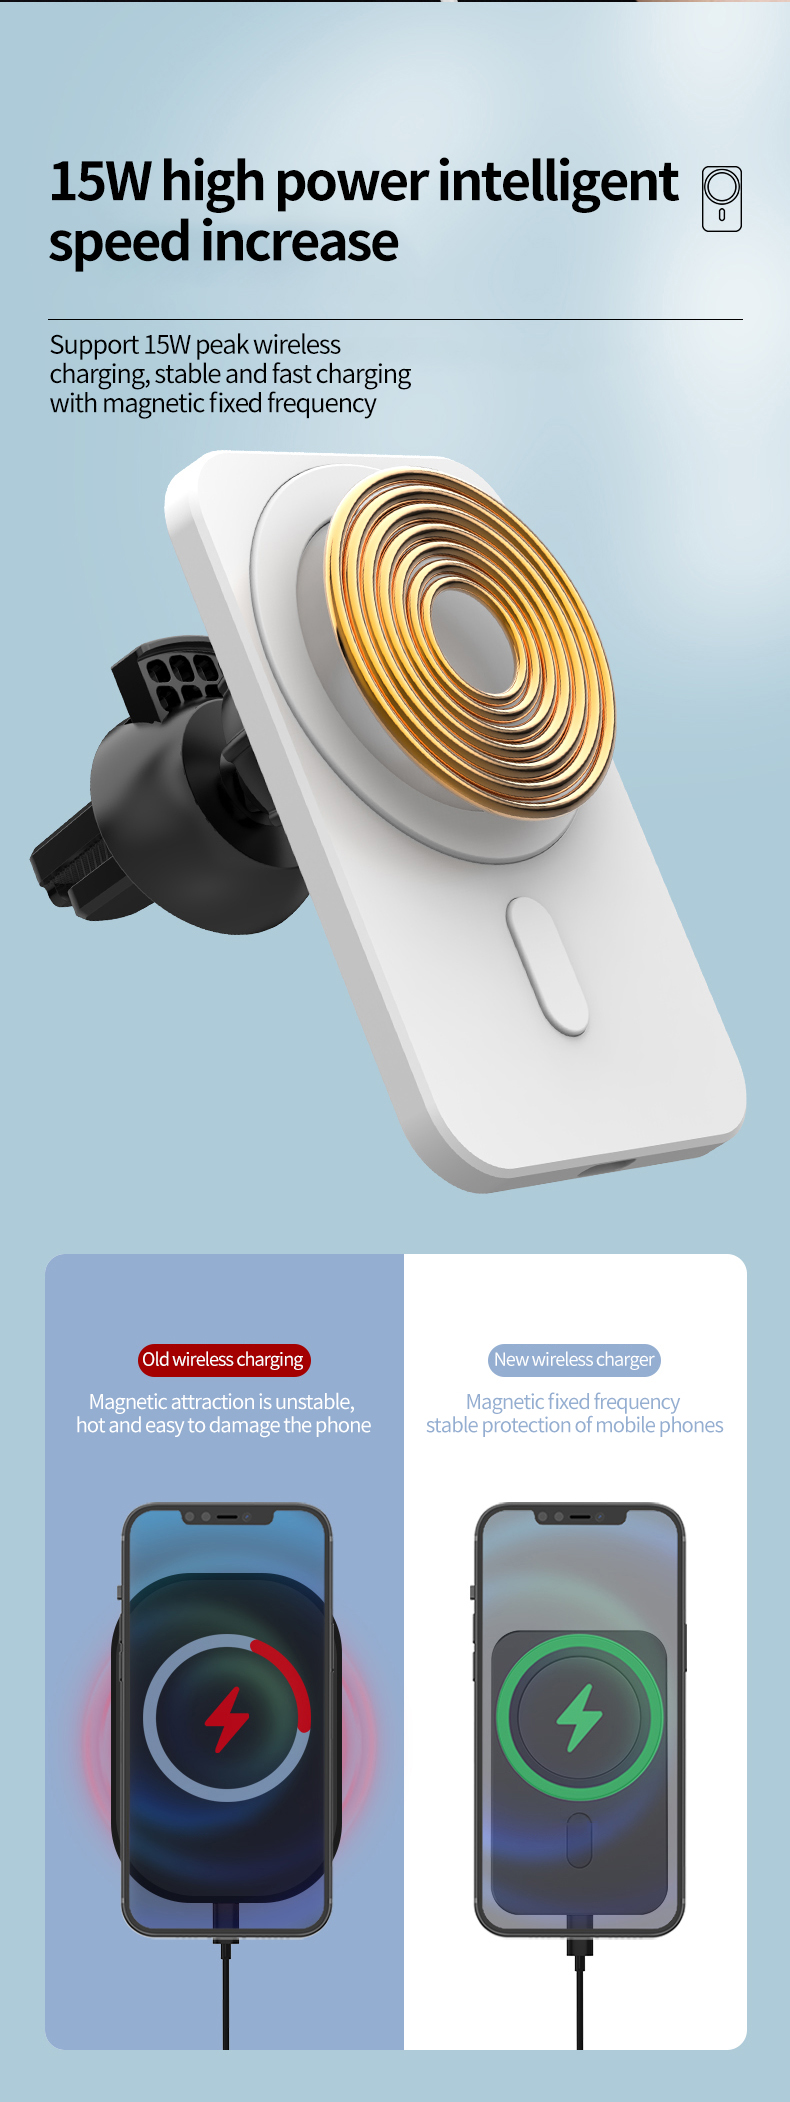 Bakeey-15W-Magnetic-Wireless-Car-Charger-Automatic-Clamping-Car-Airvent-Mount-Phone-Holder-Fast-Char-1937061-4